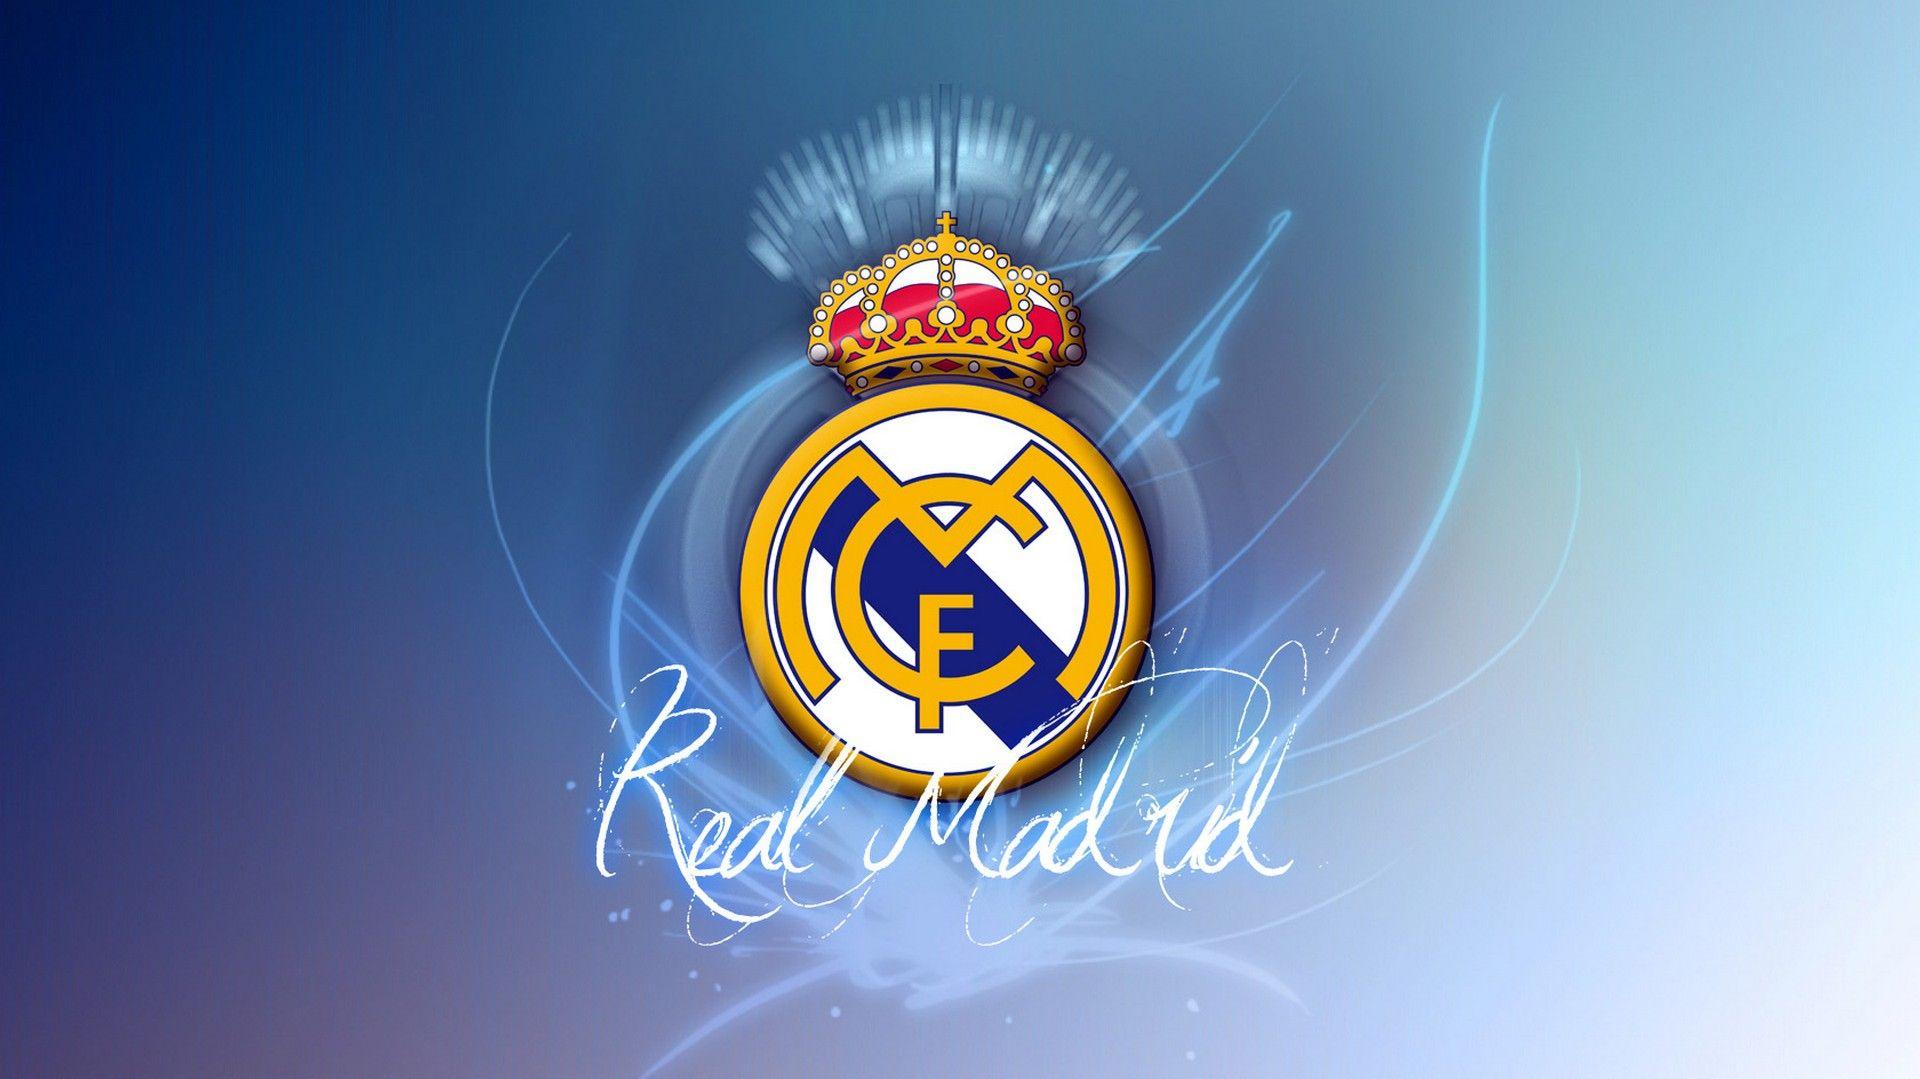 HD Real Madrid Background Best Wallpaper